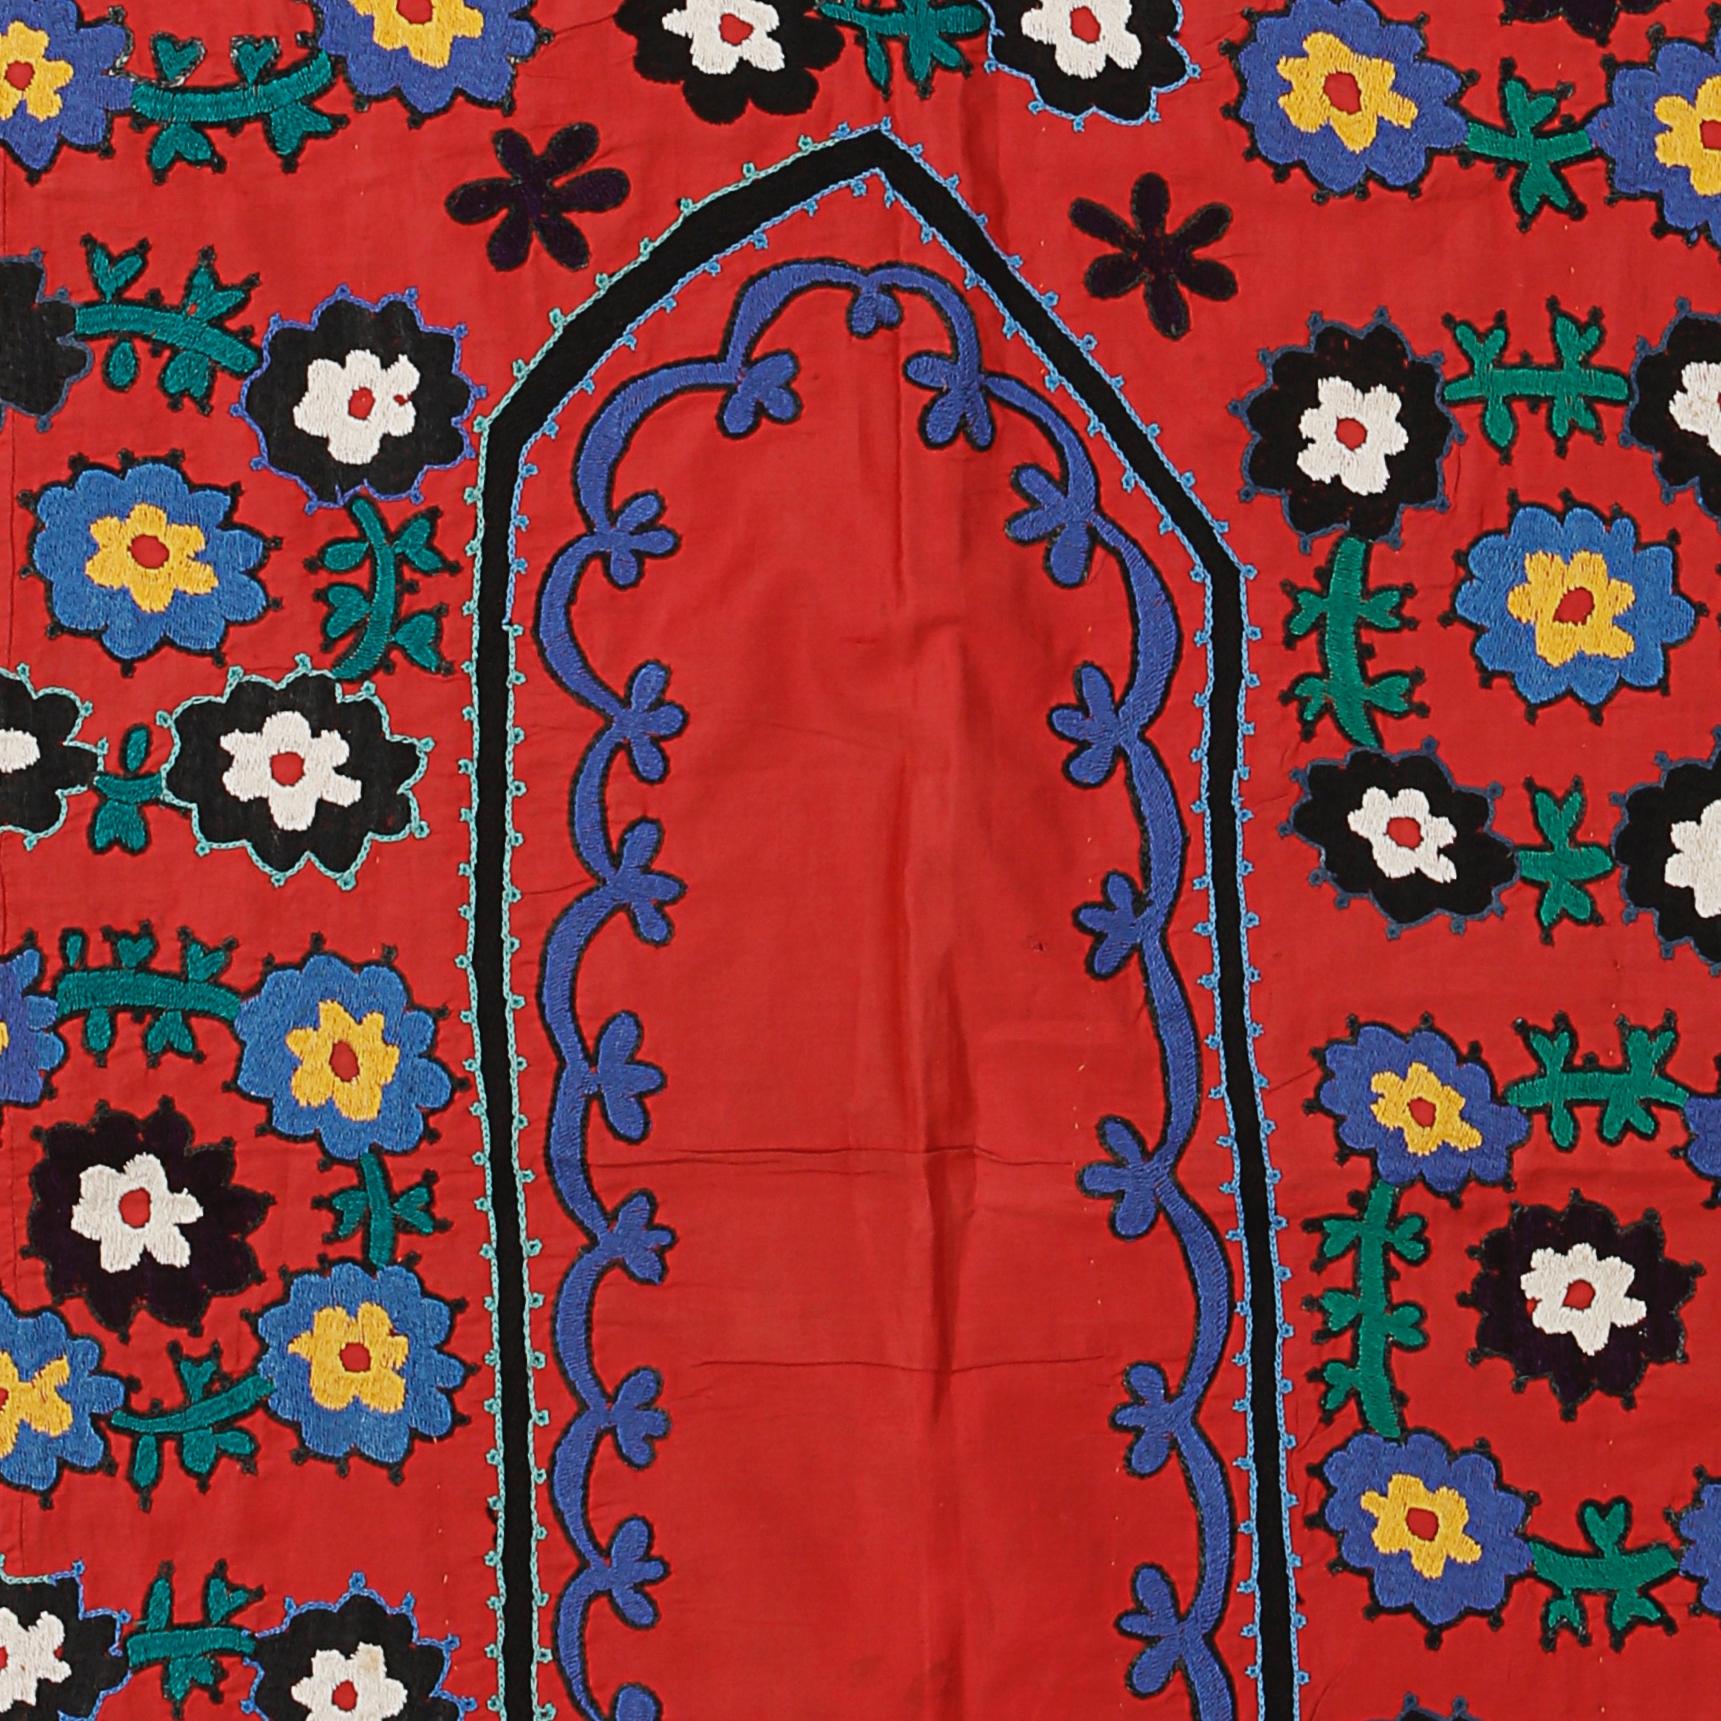 Embroidered 3x6.4 Ft Red Silk Embroidery Wall Hanging, Uzbek Wall Decor, Suzani Tablecloth For Sale